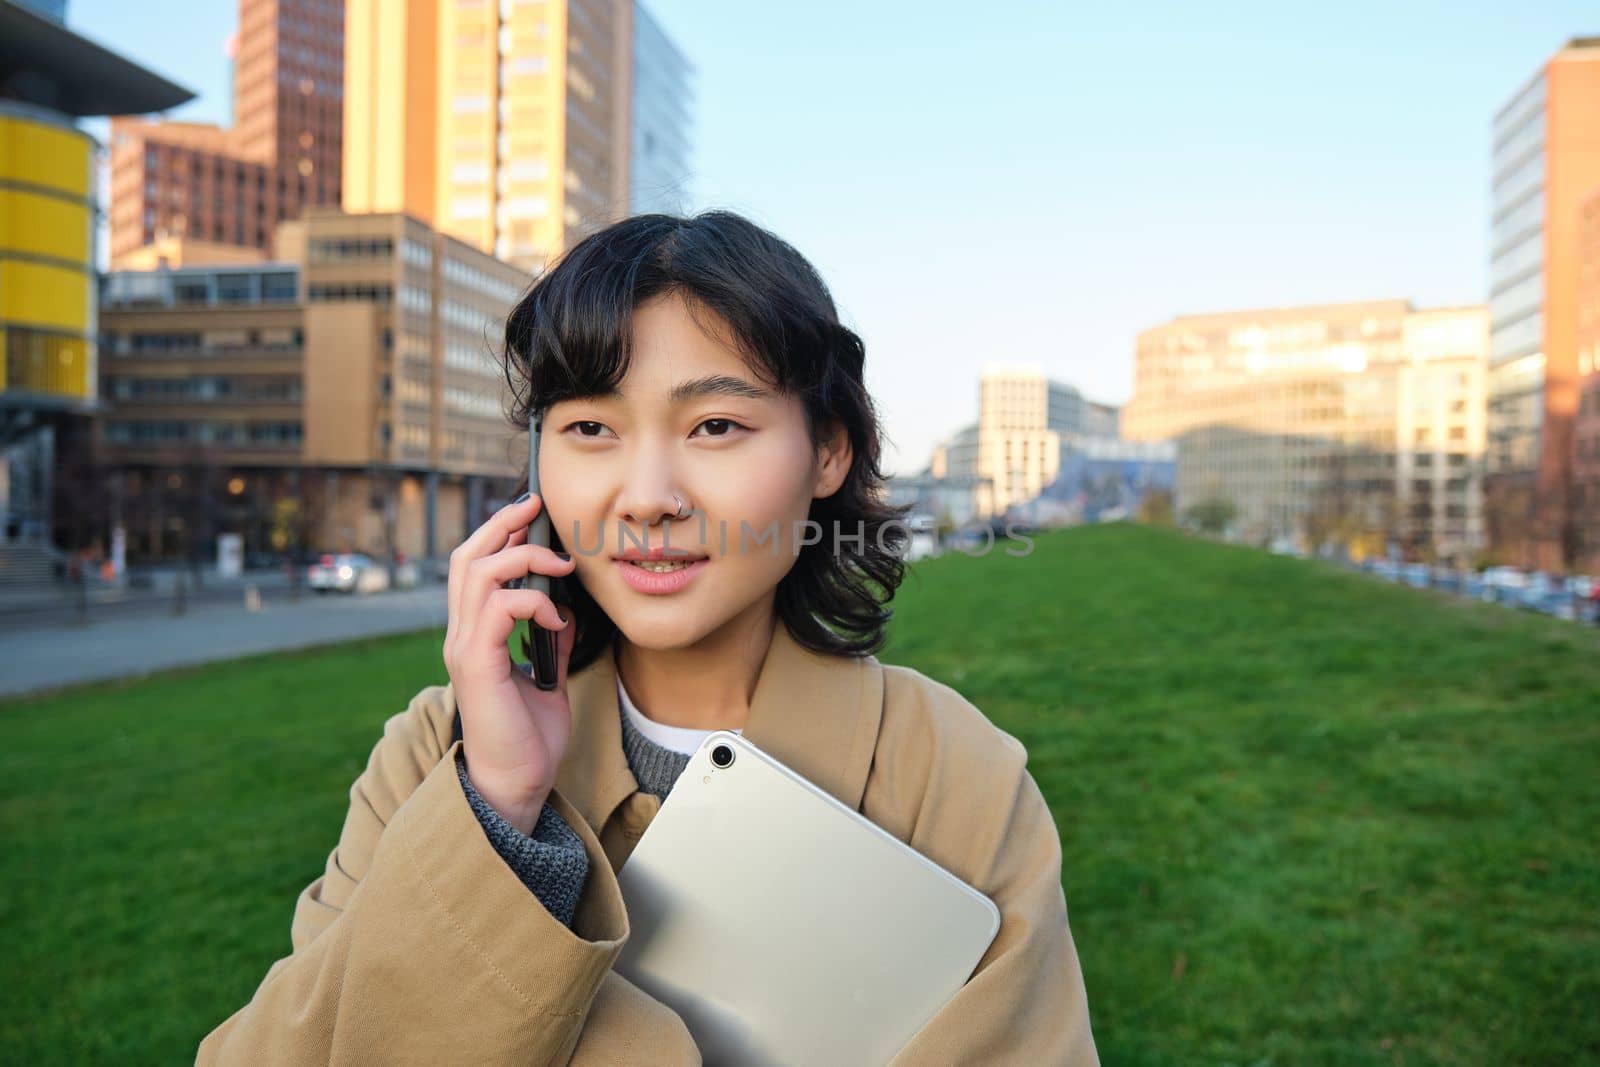 Stylish smiling girl, university student in trench coat, holds tablet, talks on mobile phone, has conversation over telephone and looks relaxed, stands on street.